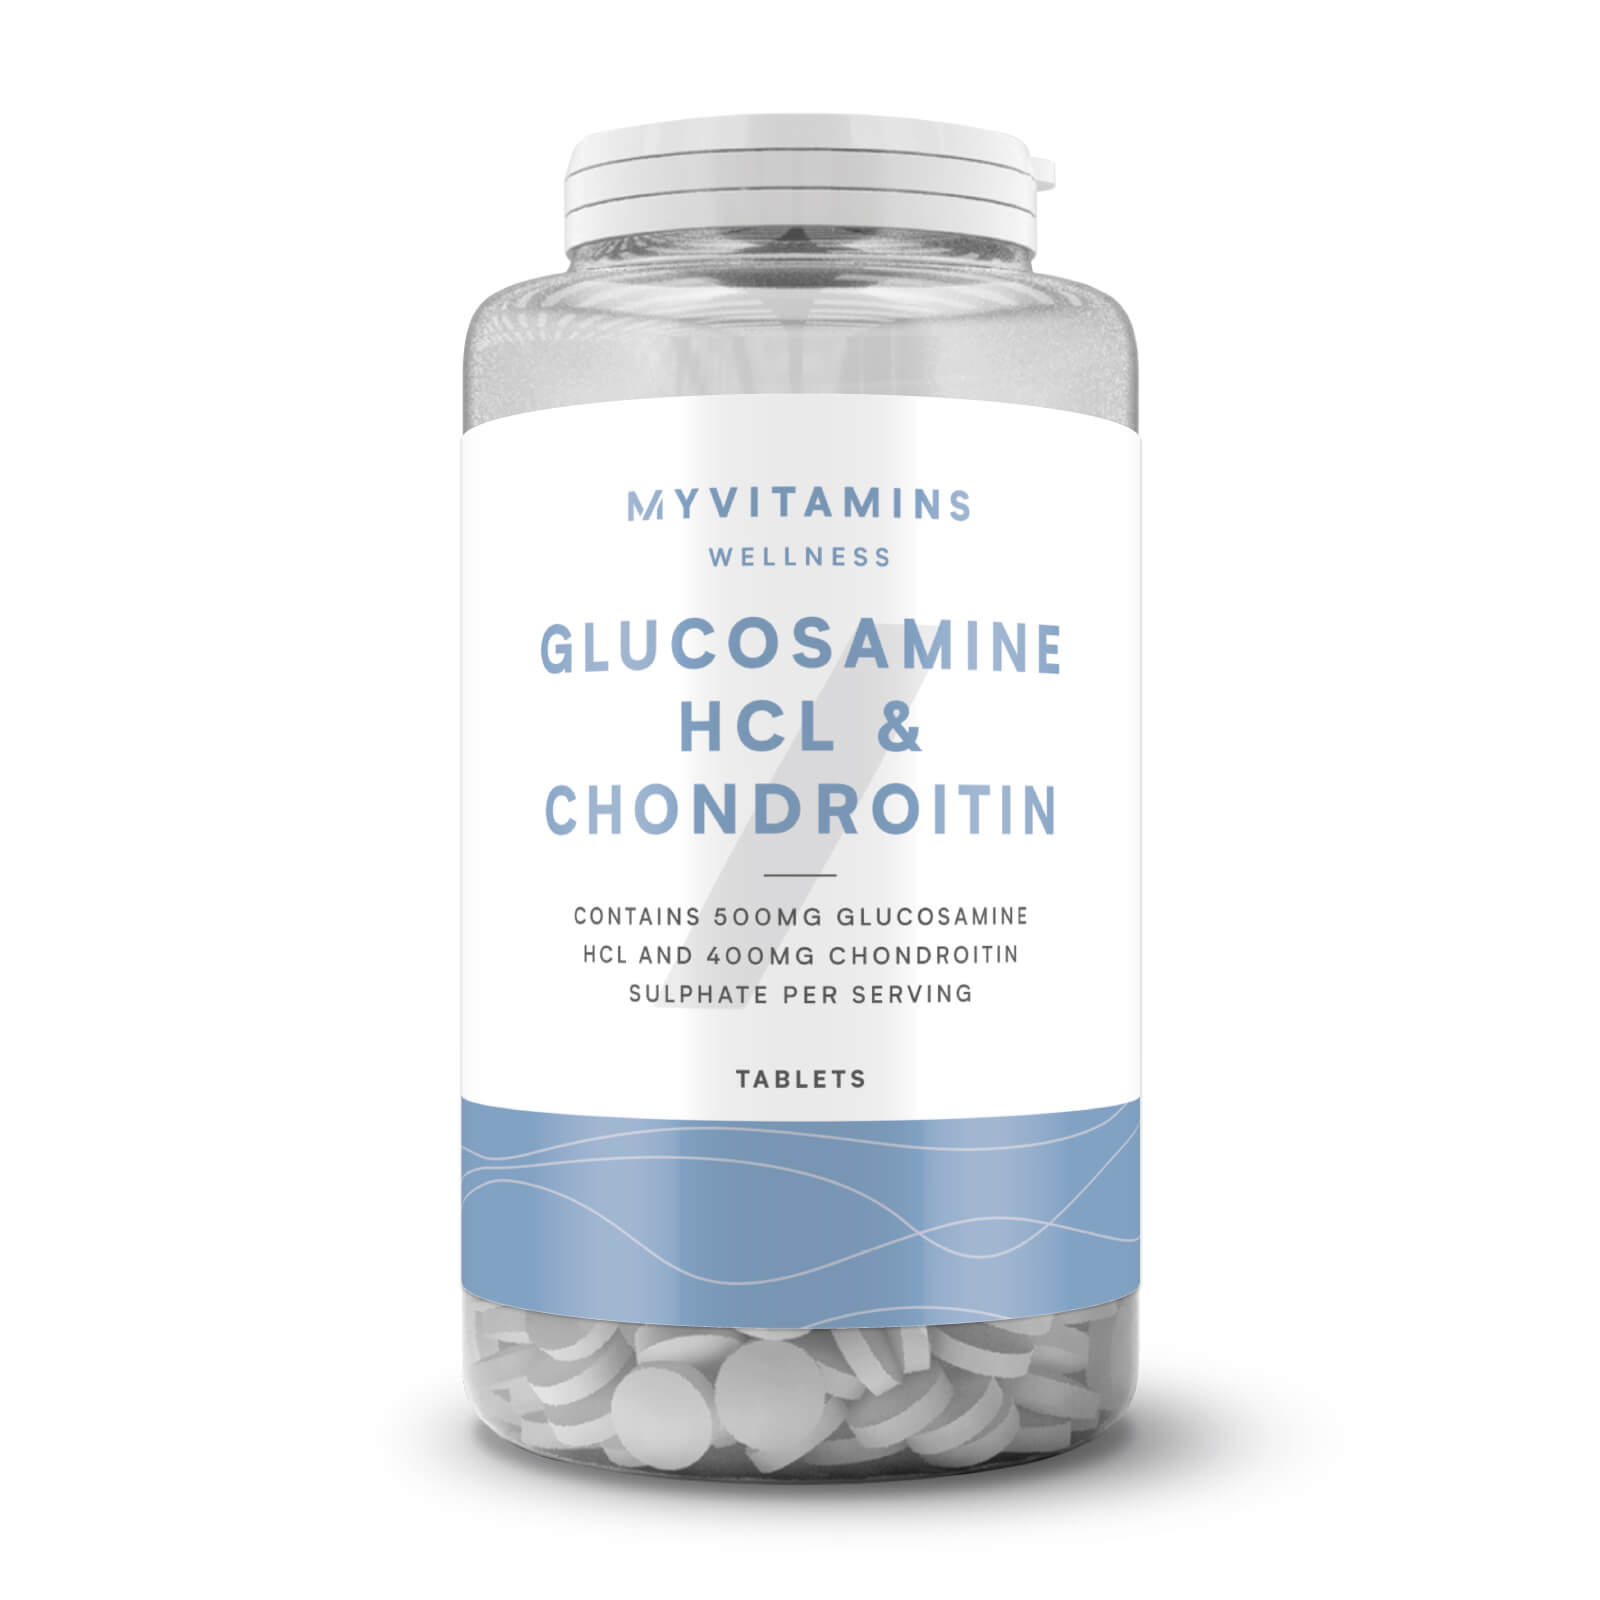 Myprotein Glucosamine HCL & Chondroitin - 120Tablets